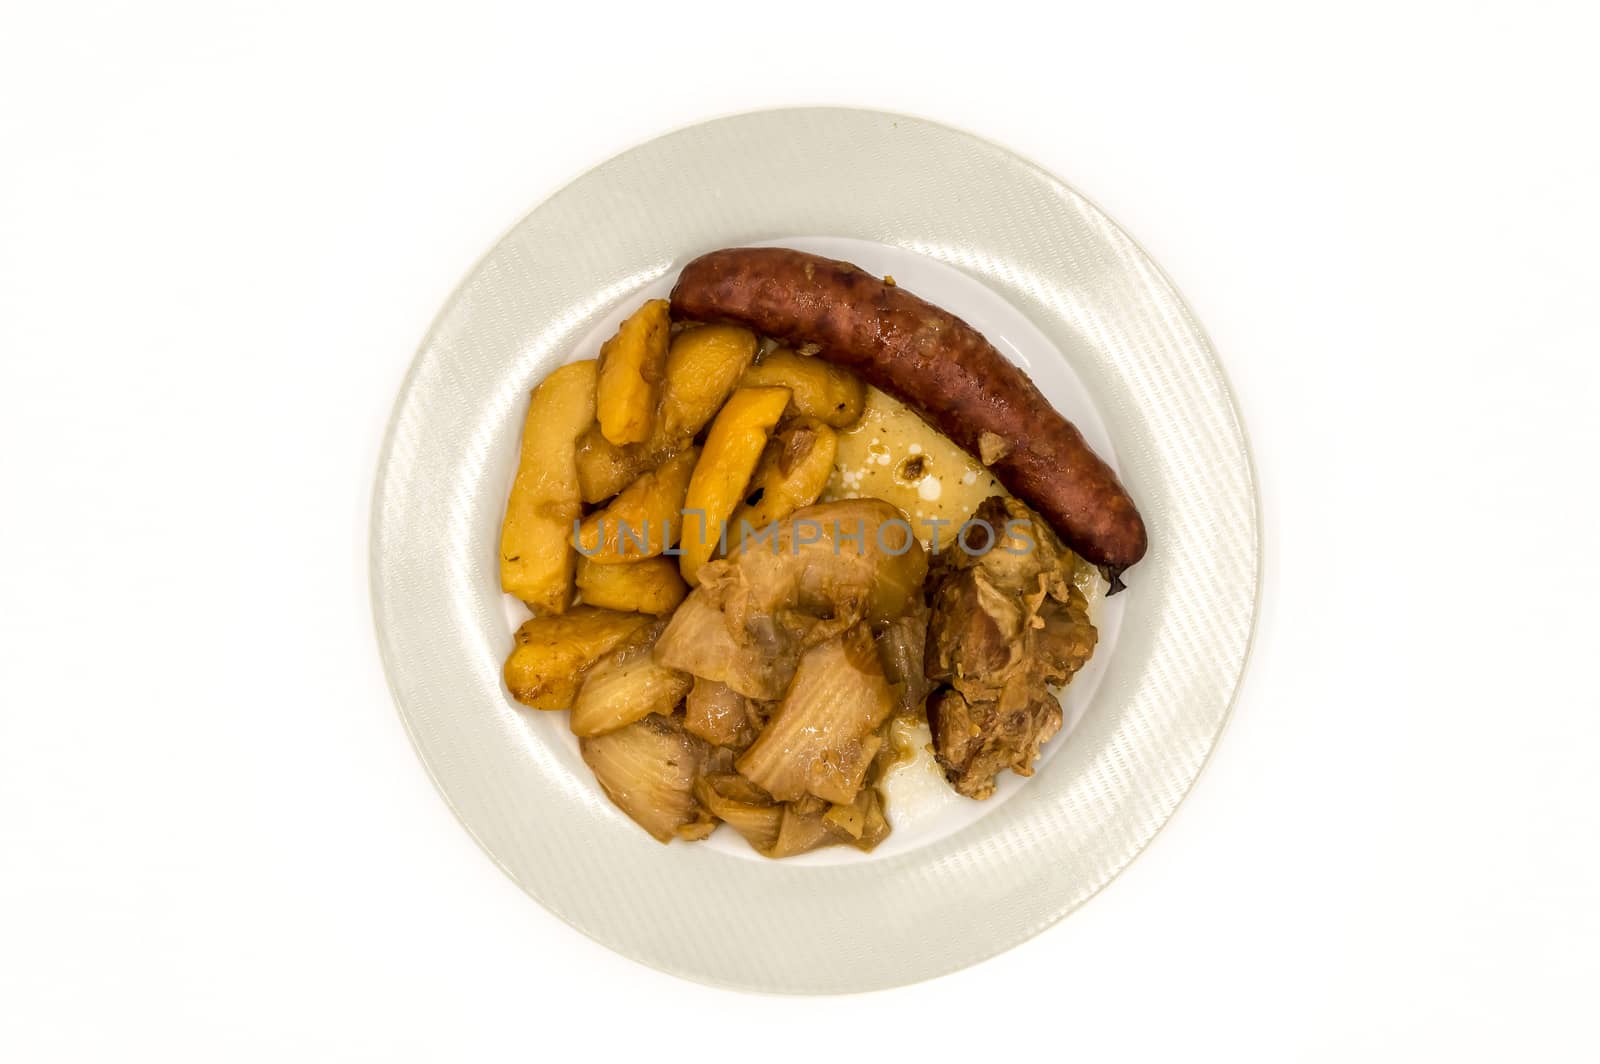 Plate of scorched white cabbage with sausage, potatoes  by Philou1000